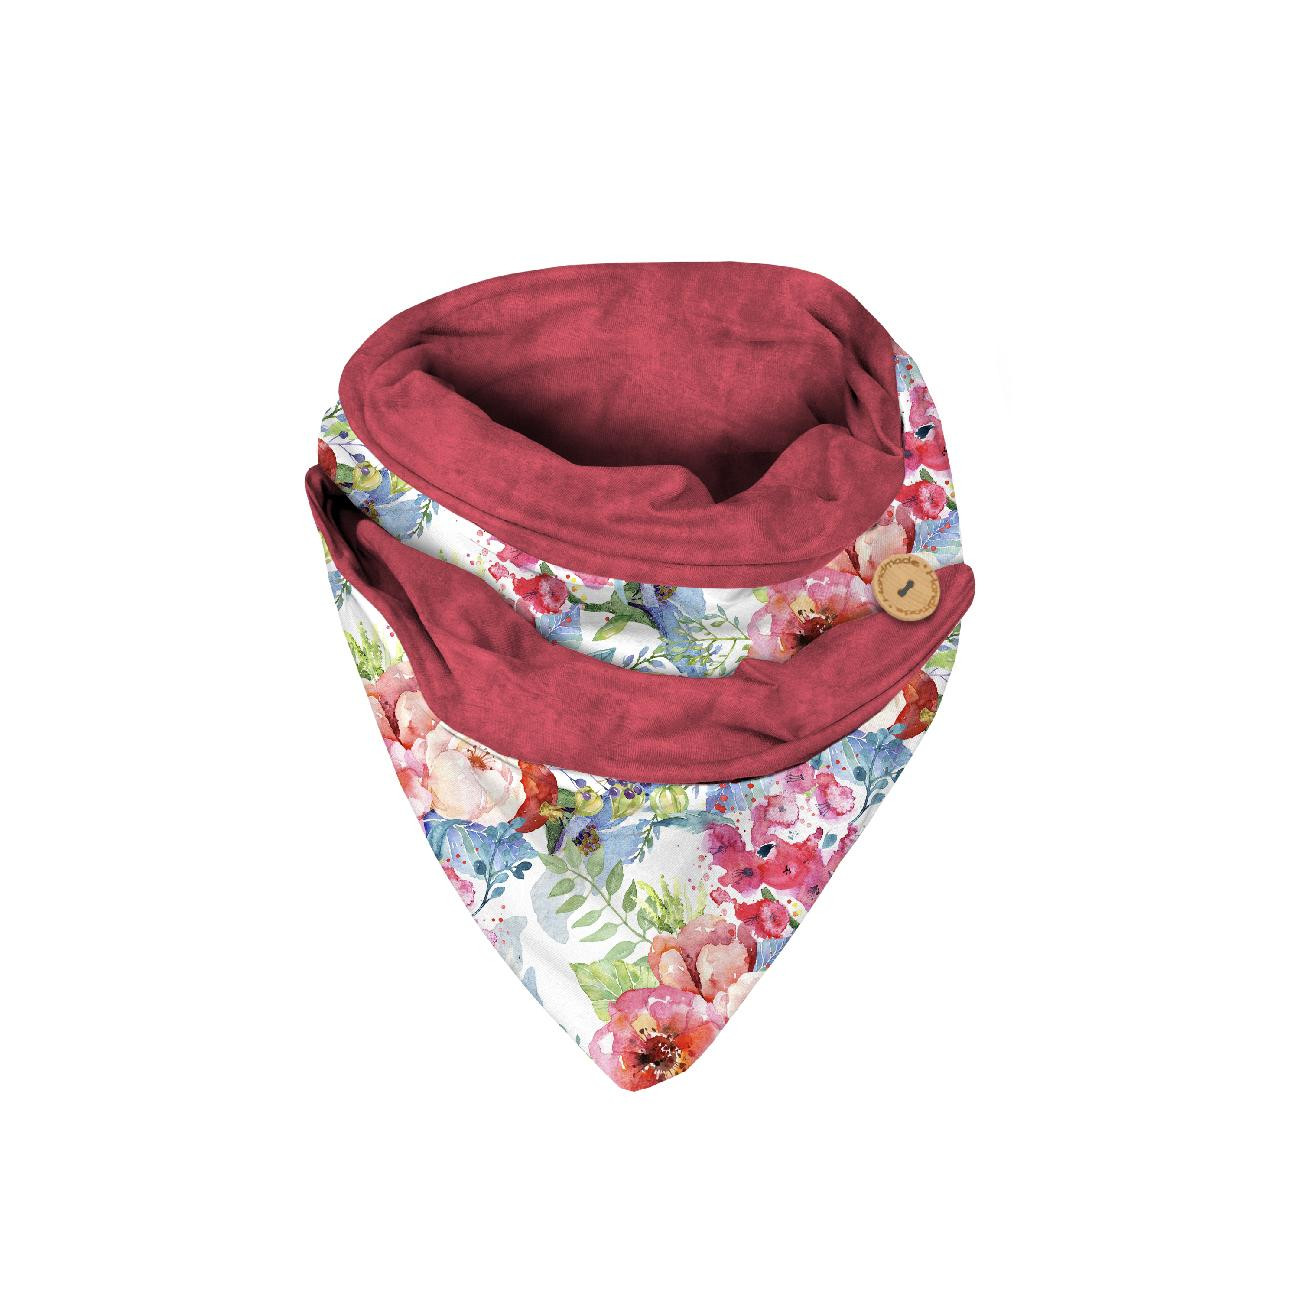 BUTTON SCARF - WILD ROSE PAT. 3 (IN THE MEADOW) - sewing set